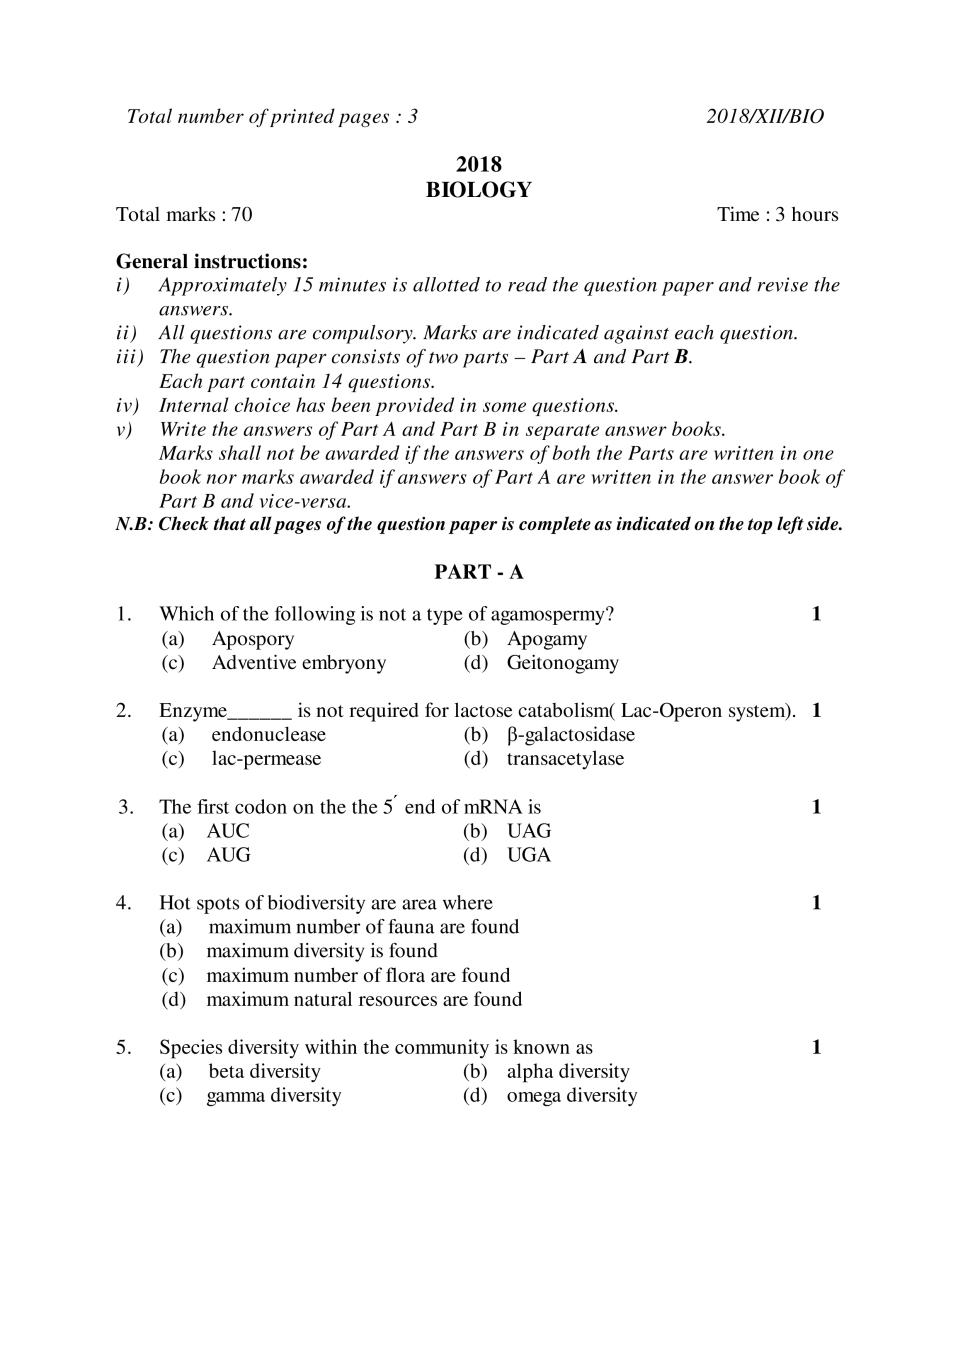 NBSE Class 12 Question Paper 2018 for Biology - Page 1